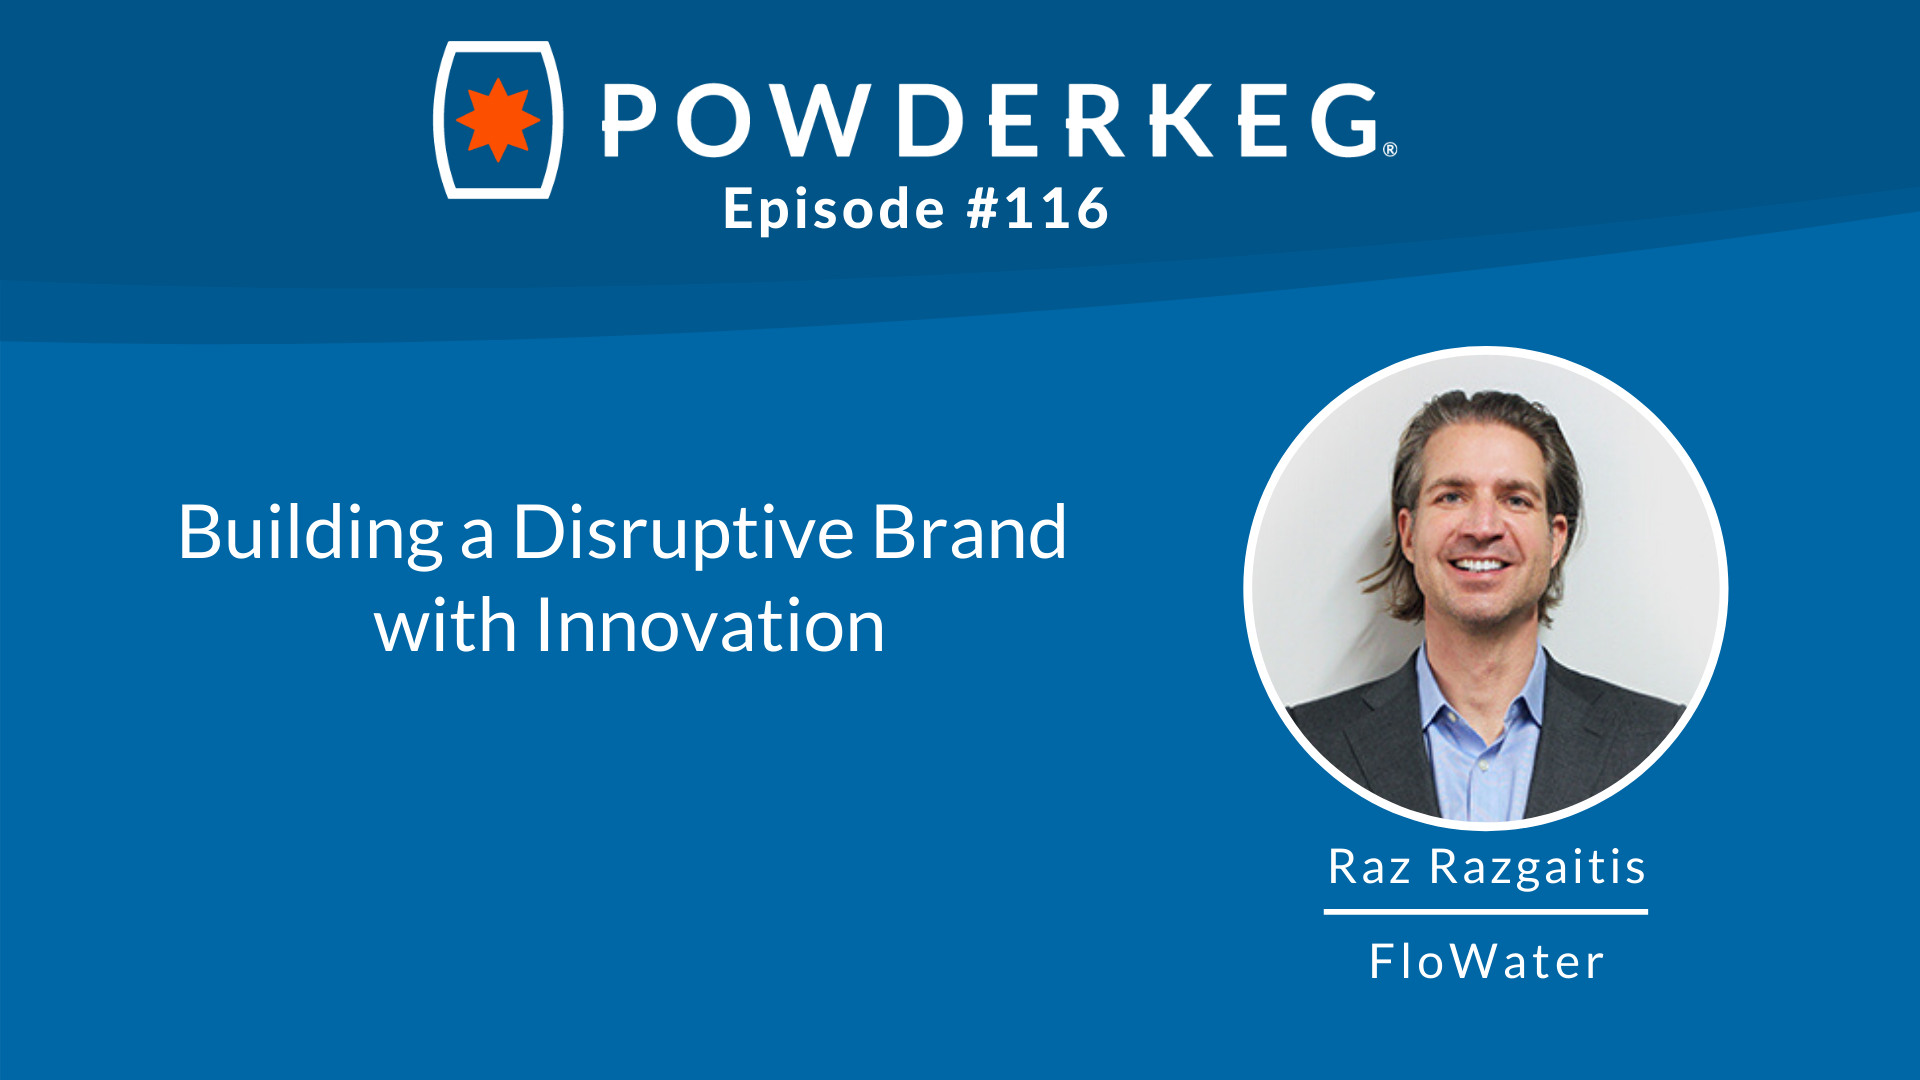 BUILDING A DISRUPTIVE BRAND WITH INNOVATION WITH RAZ RAZGAITIS OF FLOWATER